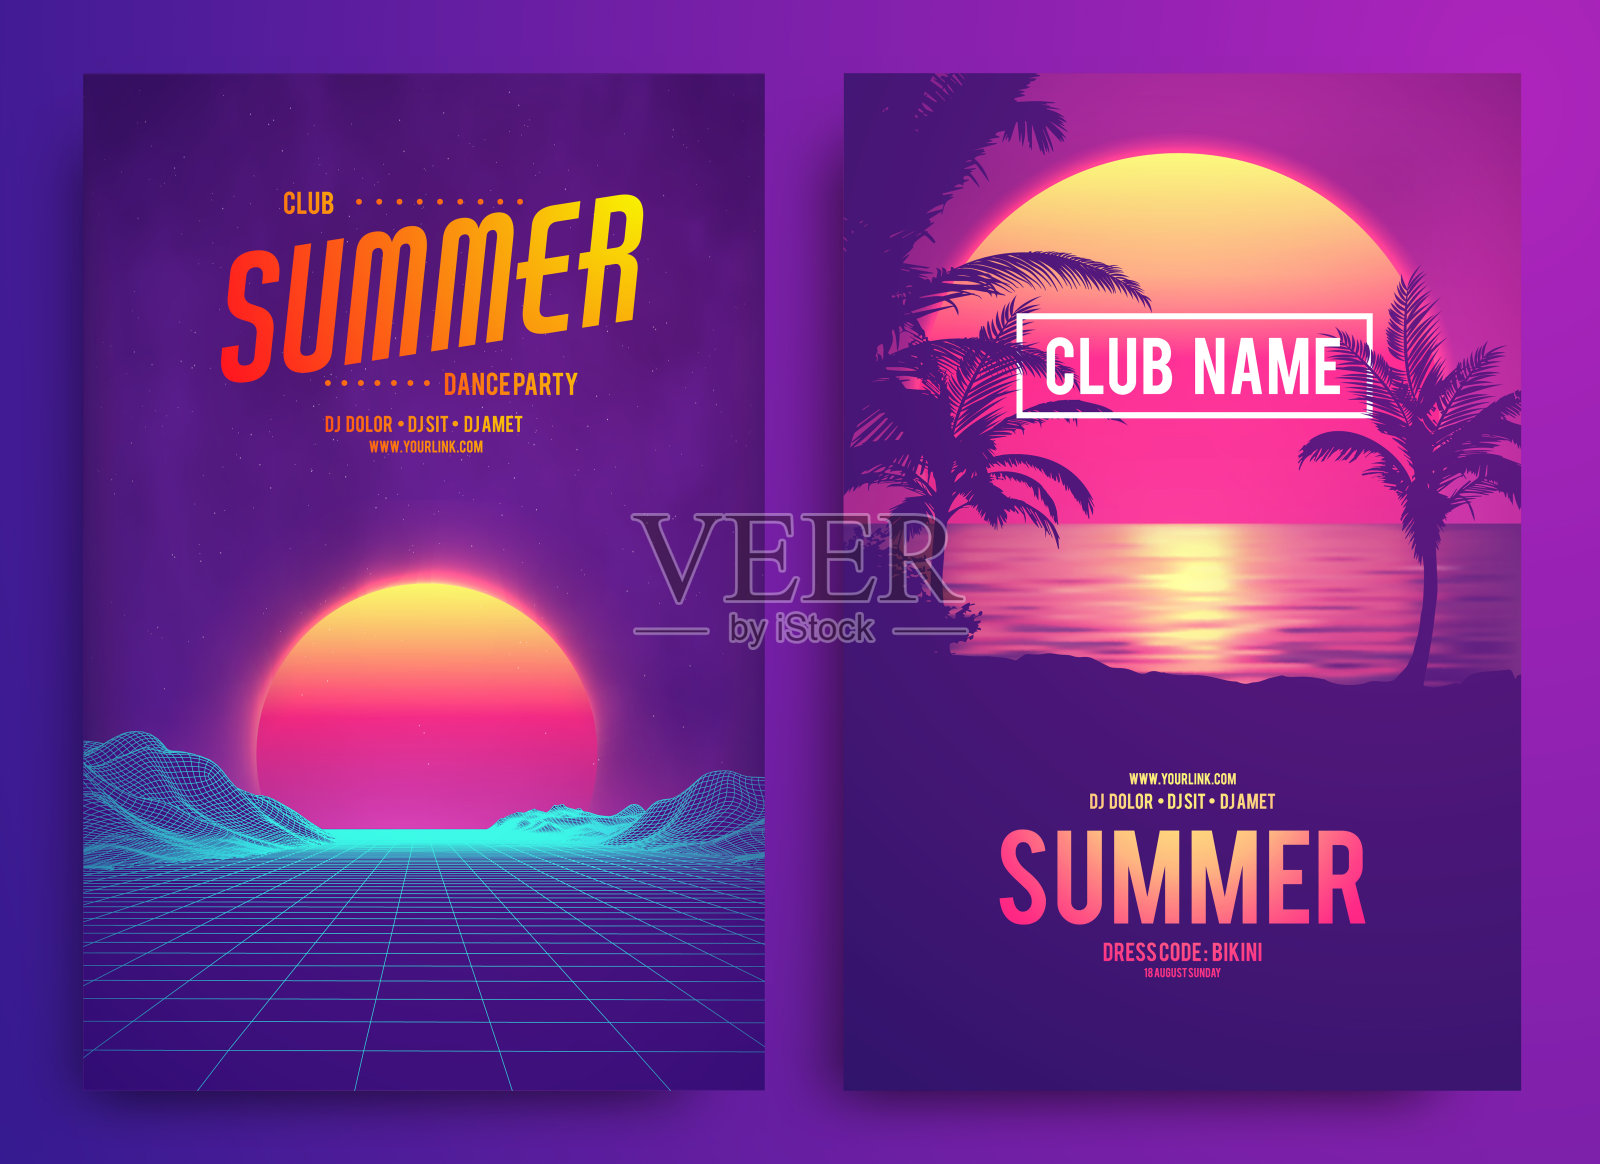 Retro background futuristic landscape 1980s style. Cocktail party, Electronic music fest, electro summer poster. Abstract gradients music background. EPS 10 Vector illustration. Vibrant design.设计模板素材